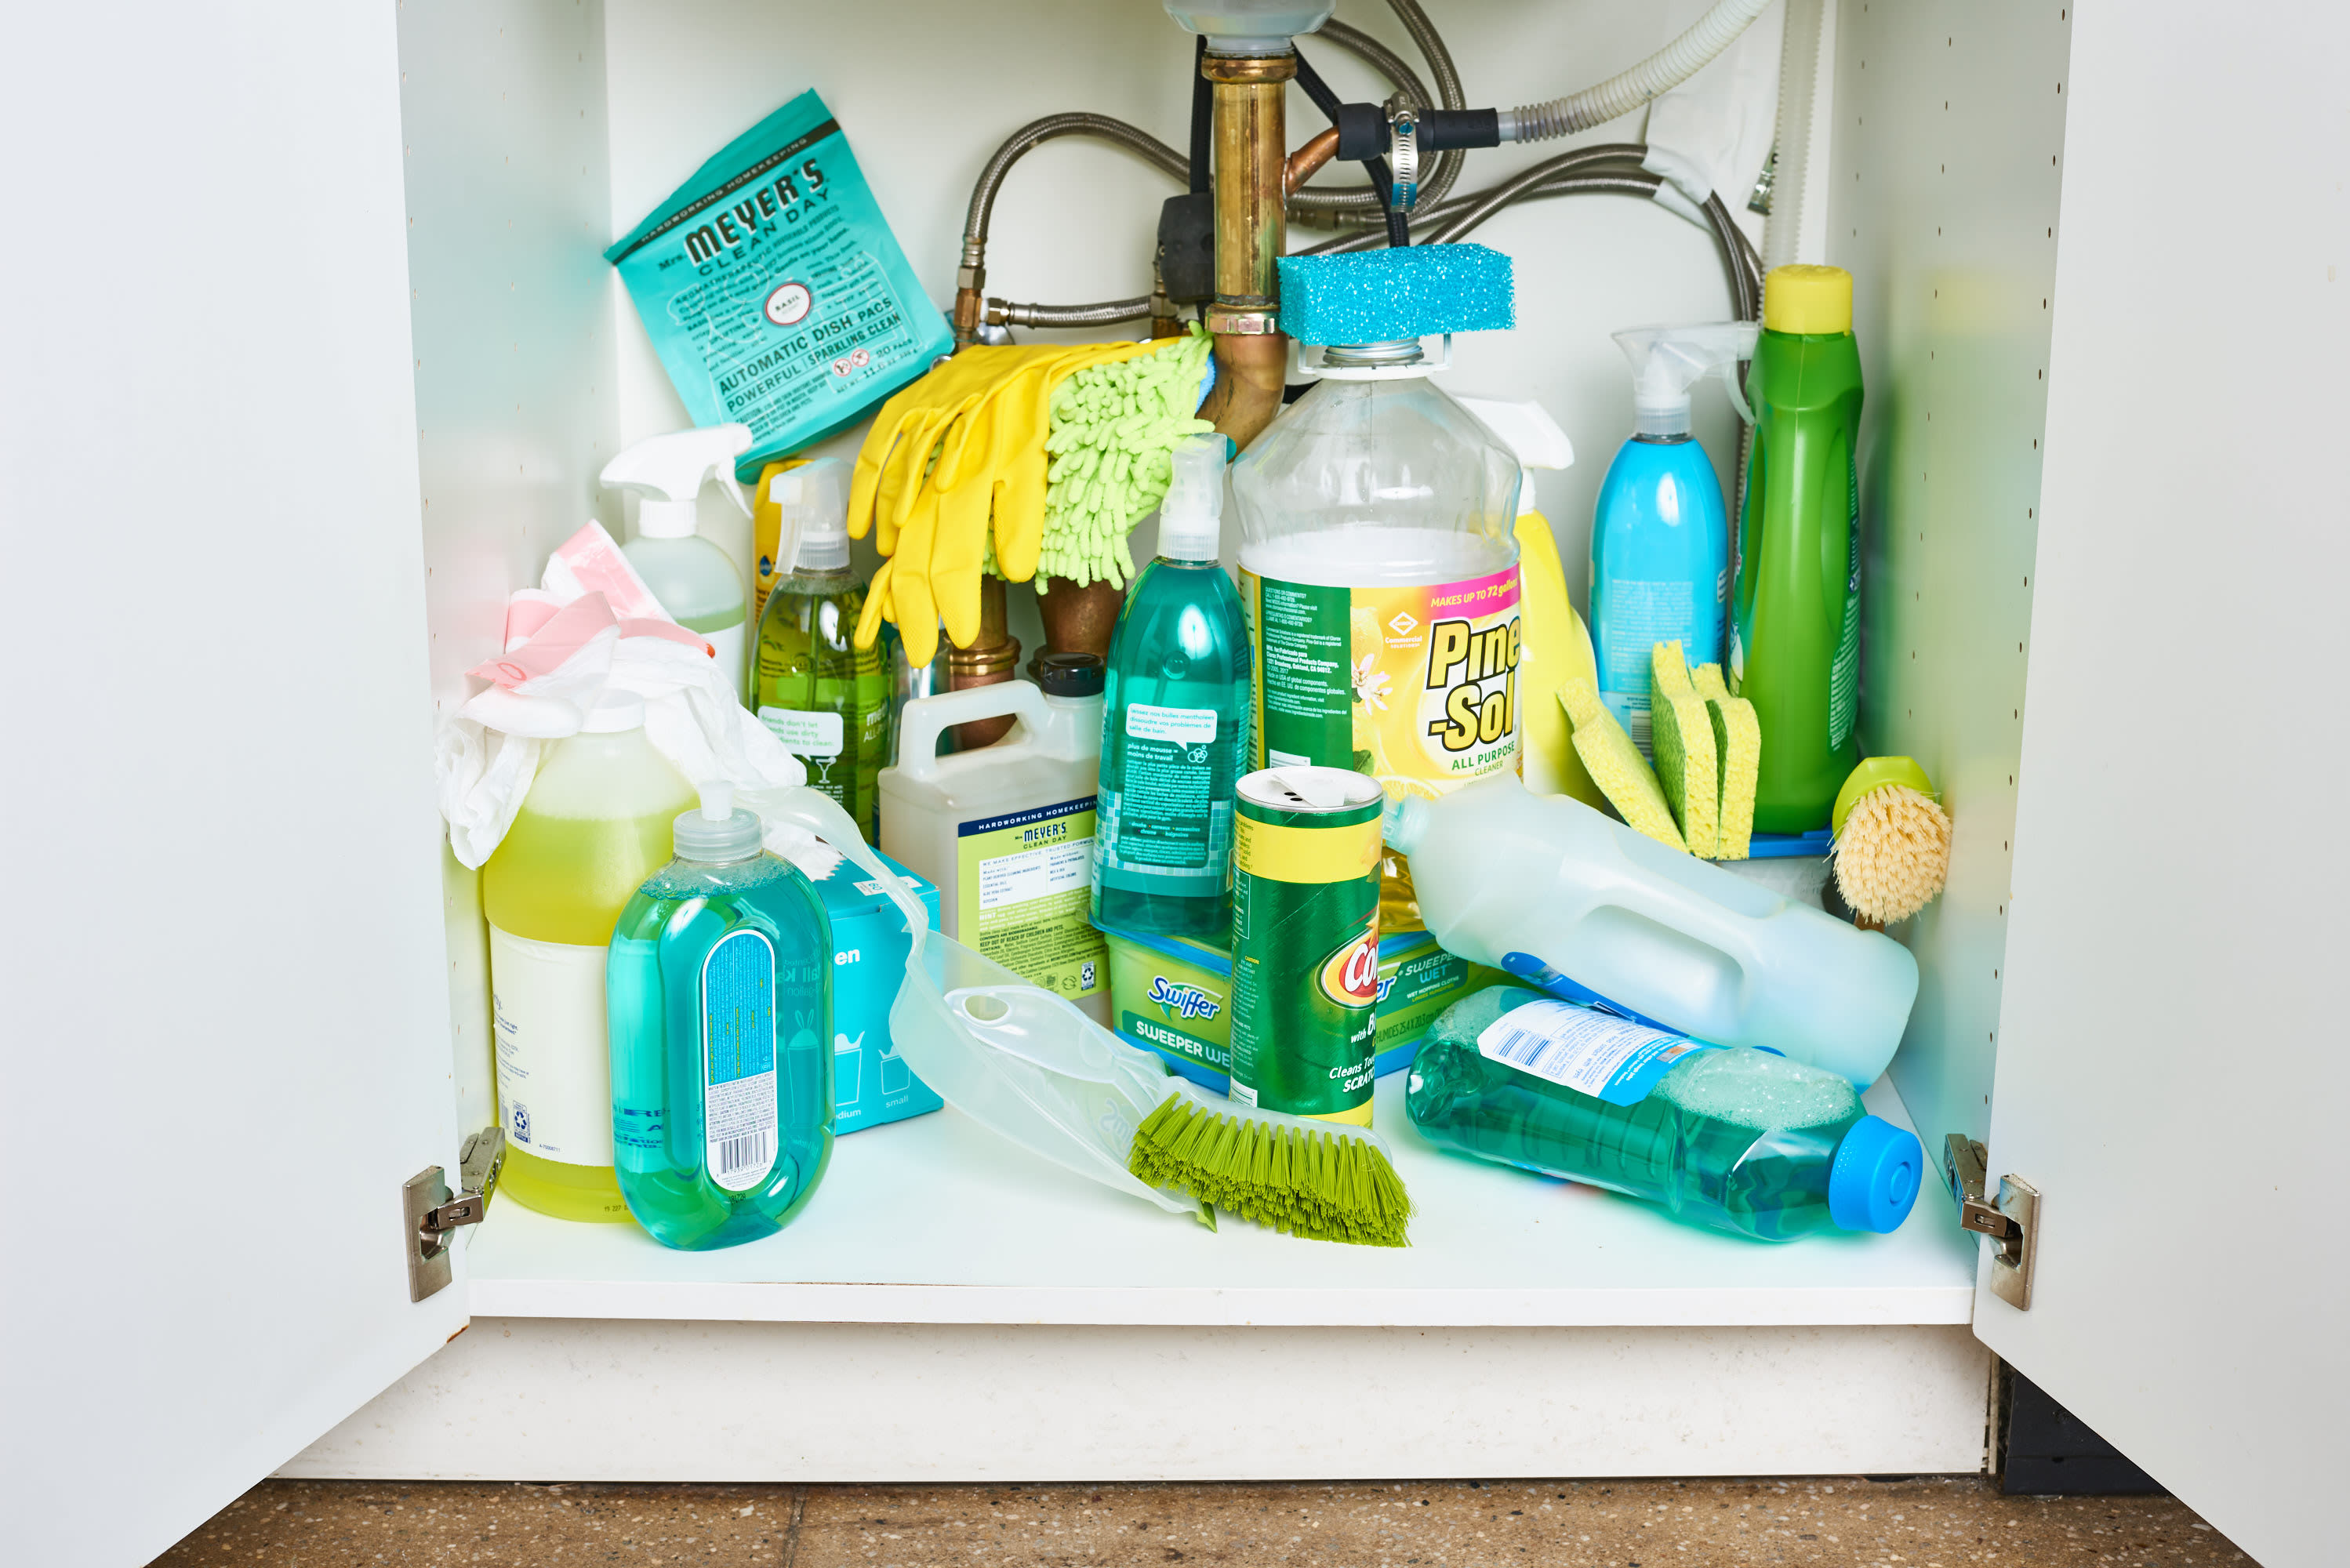 The Best Ways to Organize Cleaning Supplies